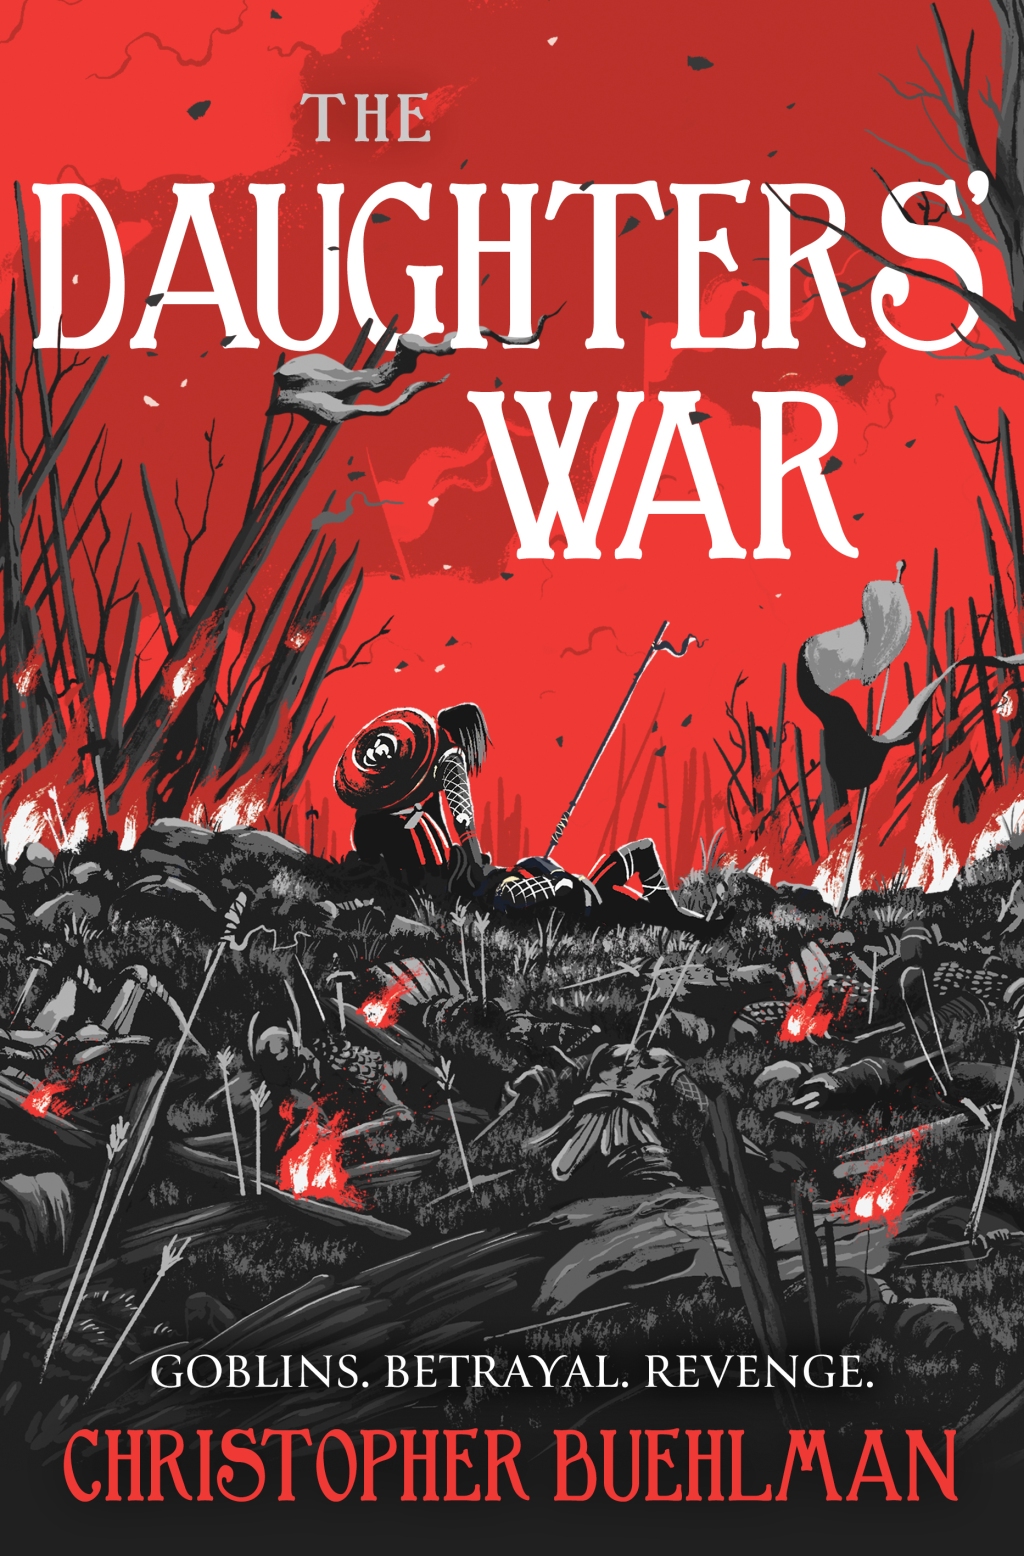 Book Review: The Daughters’ War by Christopher Buehlman (fantasy)